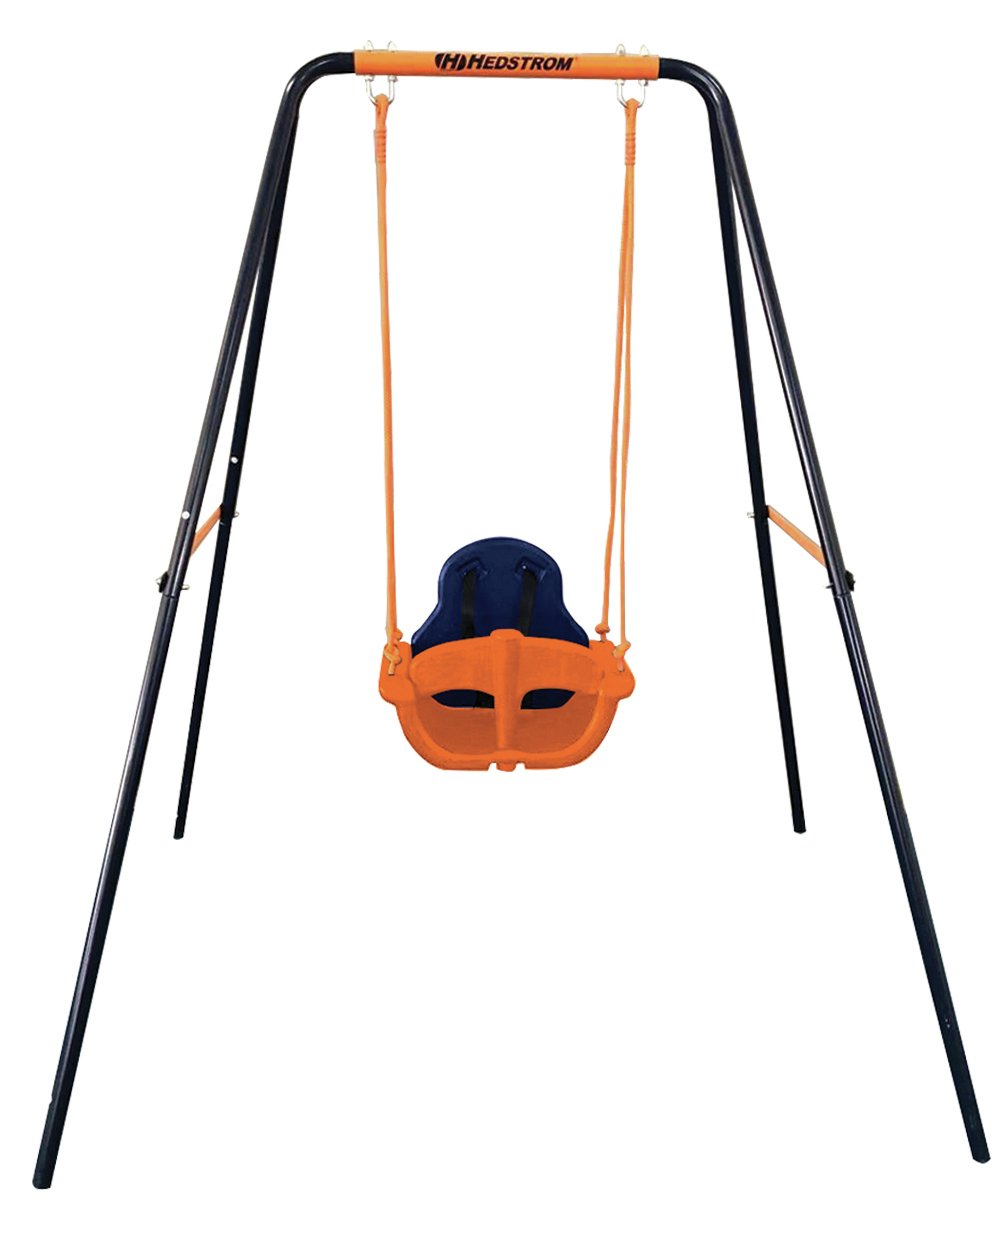 Hedstrom Deluxe 3 in 1 Toddler and Kids Garden Swing Review